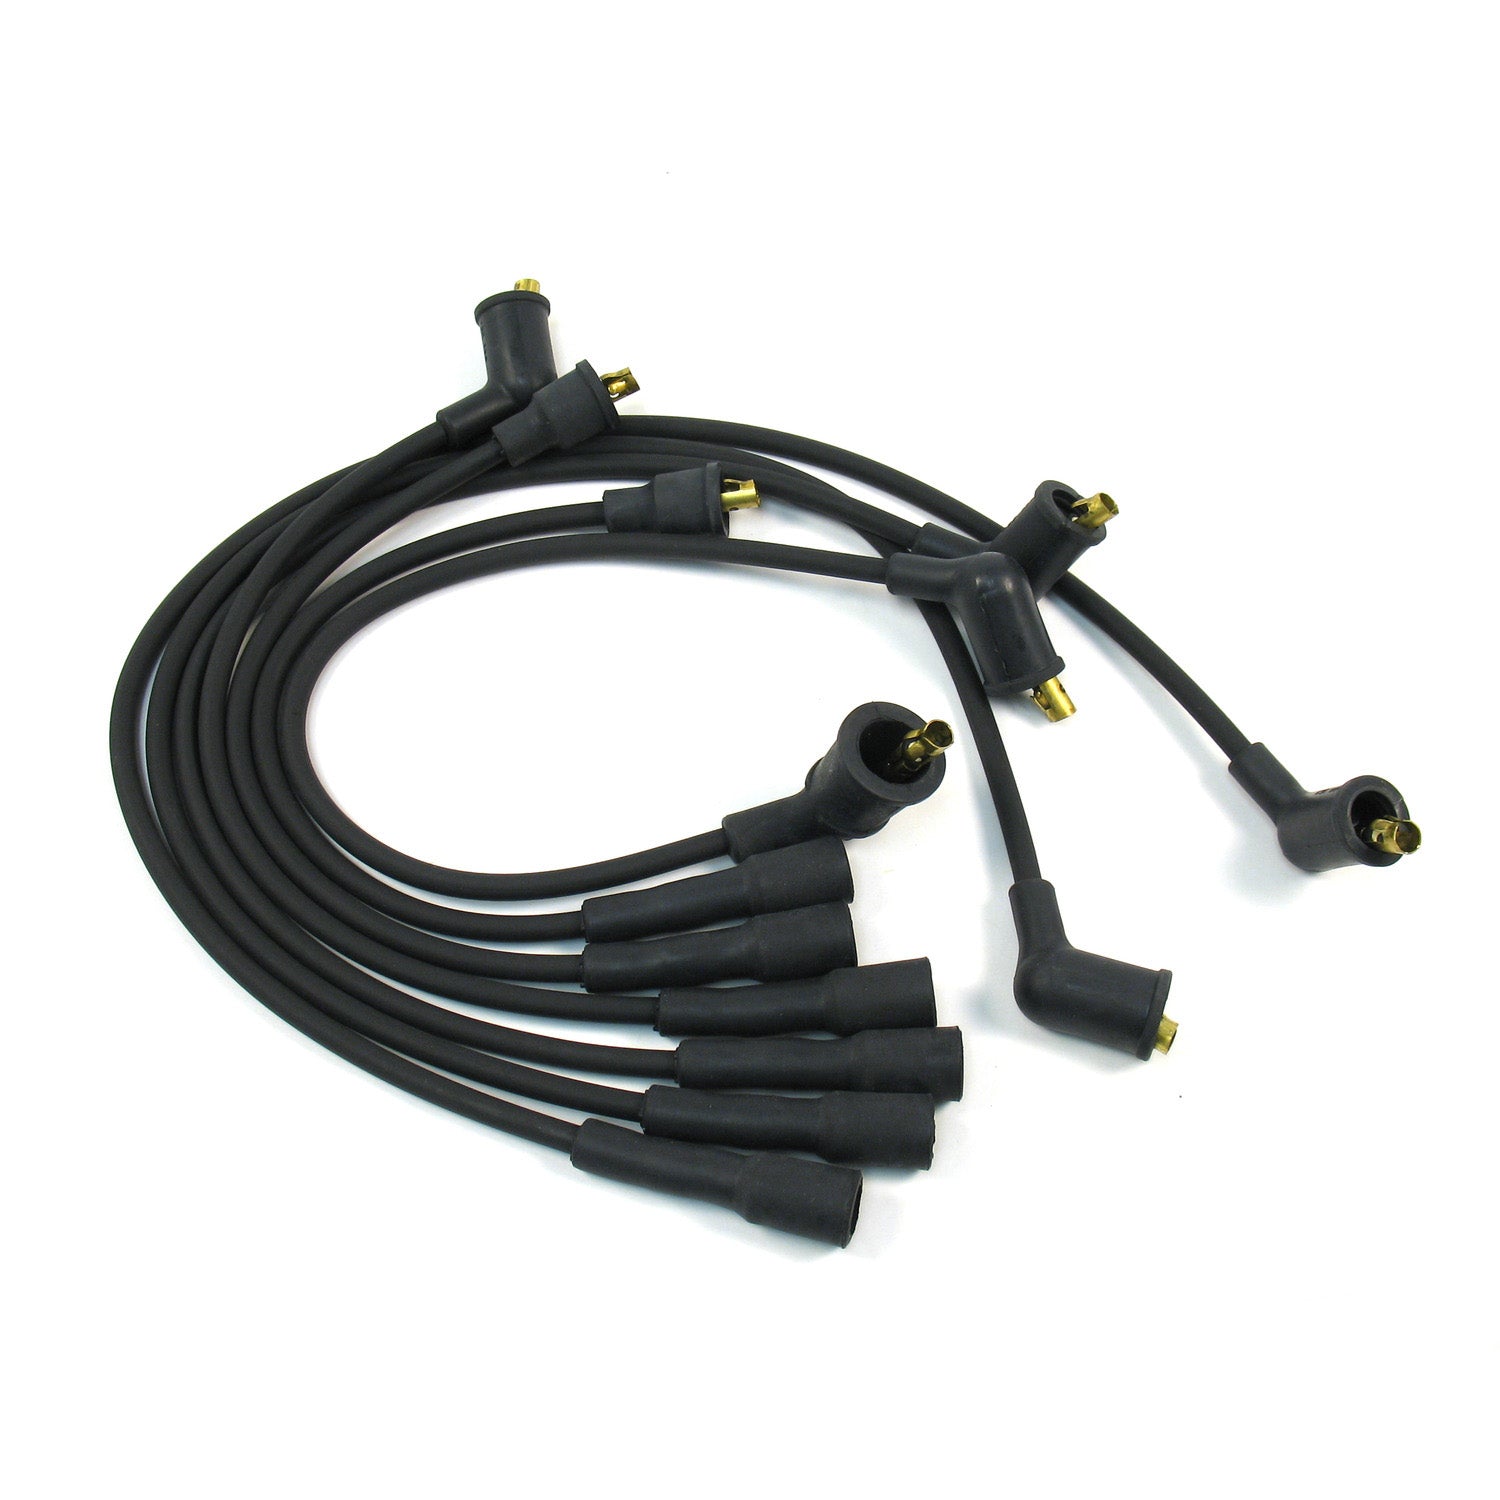 PerTronix Ignition Spark Plug Wires | No More Burnt Wires